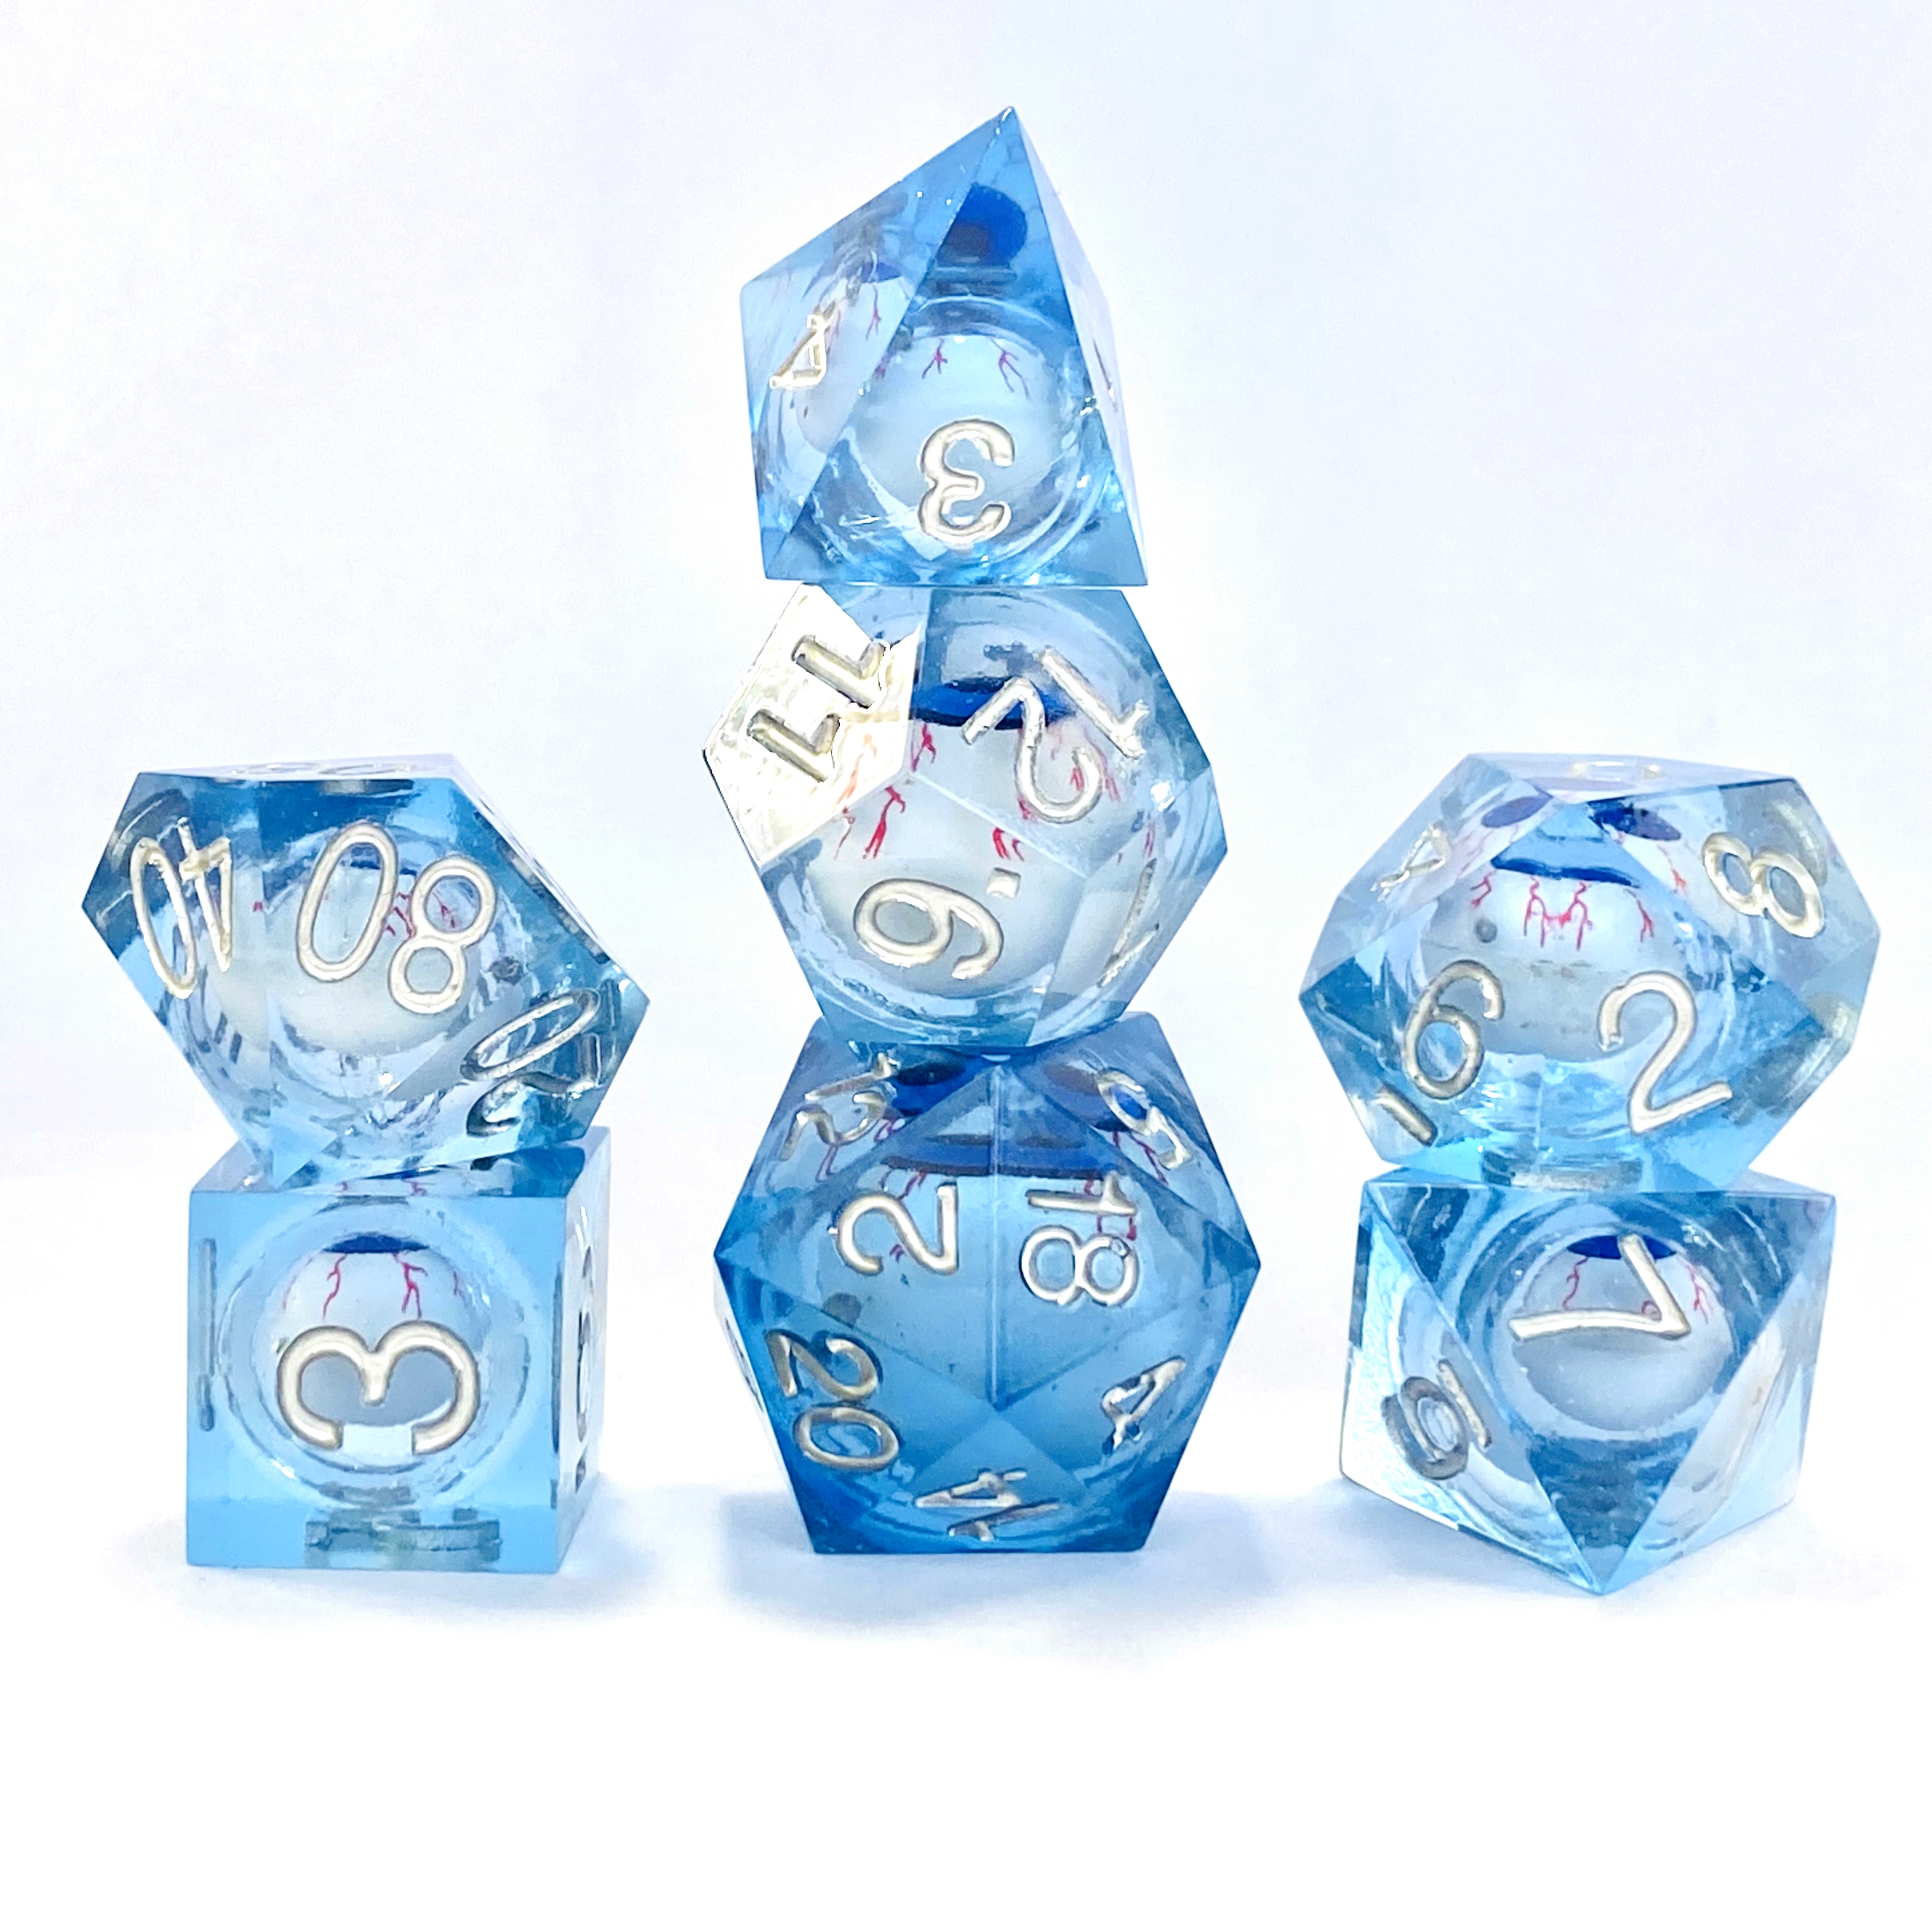 China Wholesale Solid Silver Dice Factory –  Factory source China Dnd Dice Set Accessories Skull Mtg Dungeons and Dragons D&D Rpg D20 Polyhedral Math Board Game Pathfinder Sharp Edge Res...